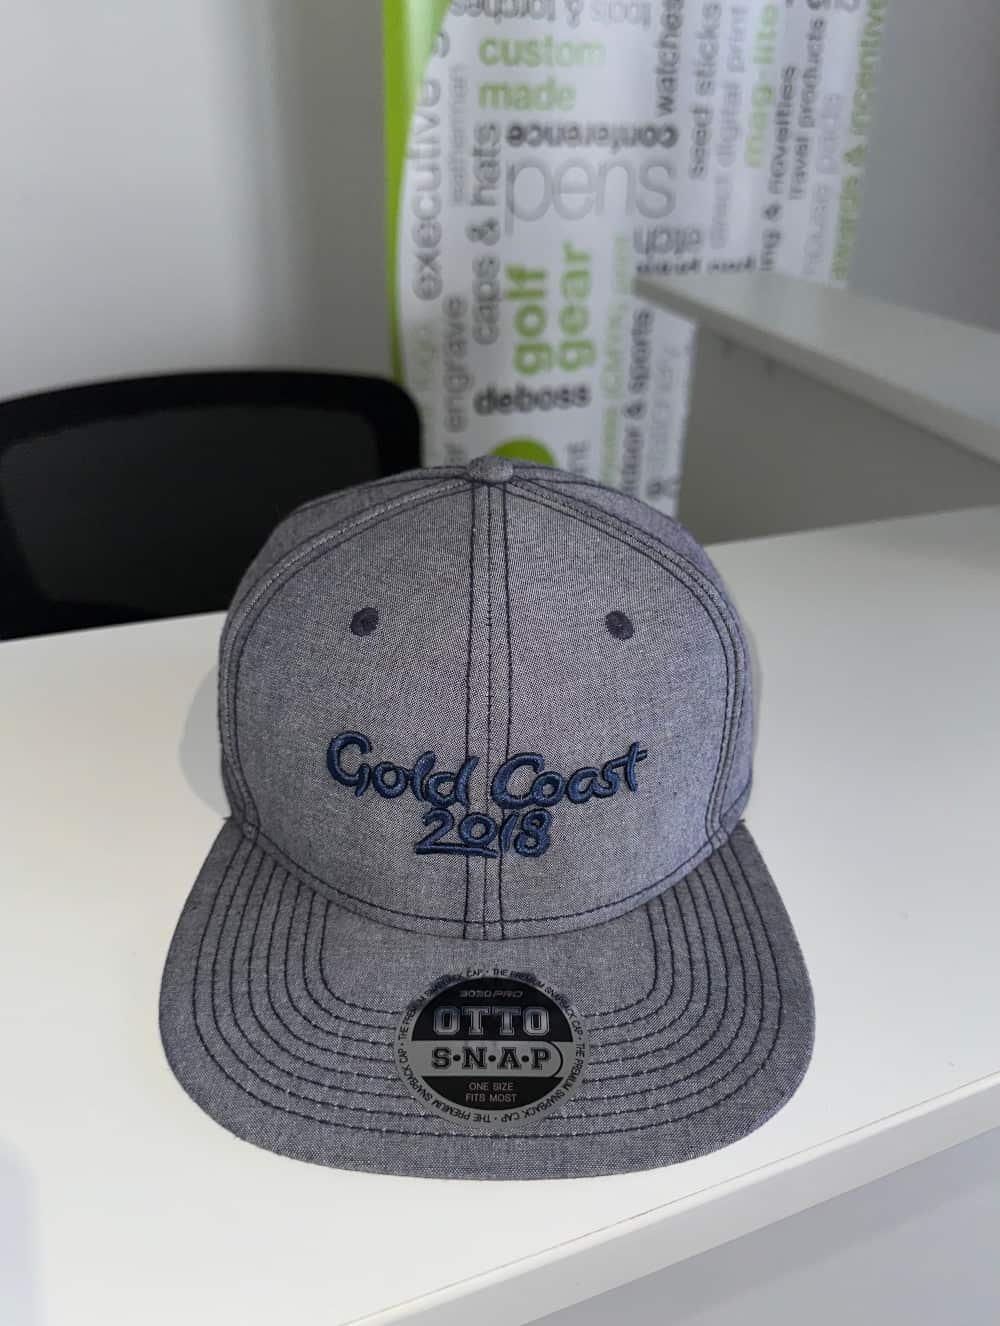 Gold Coast 2018 Commonwealth Games Corporation (GOLDOC) branded promotional cap